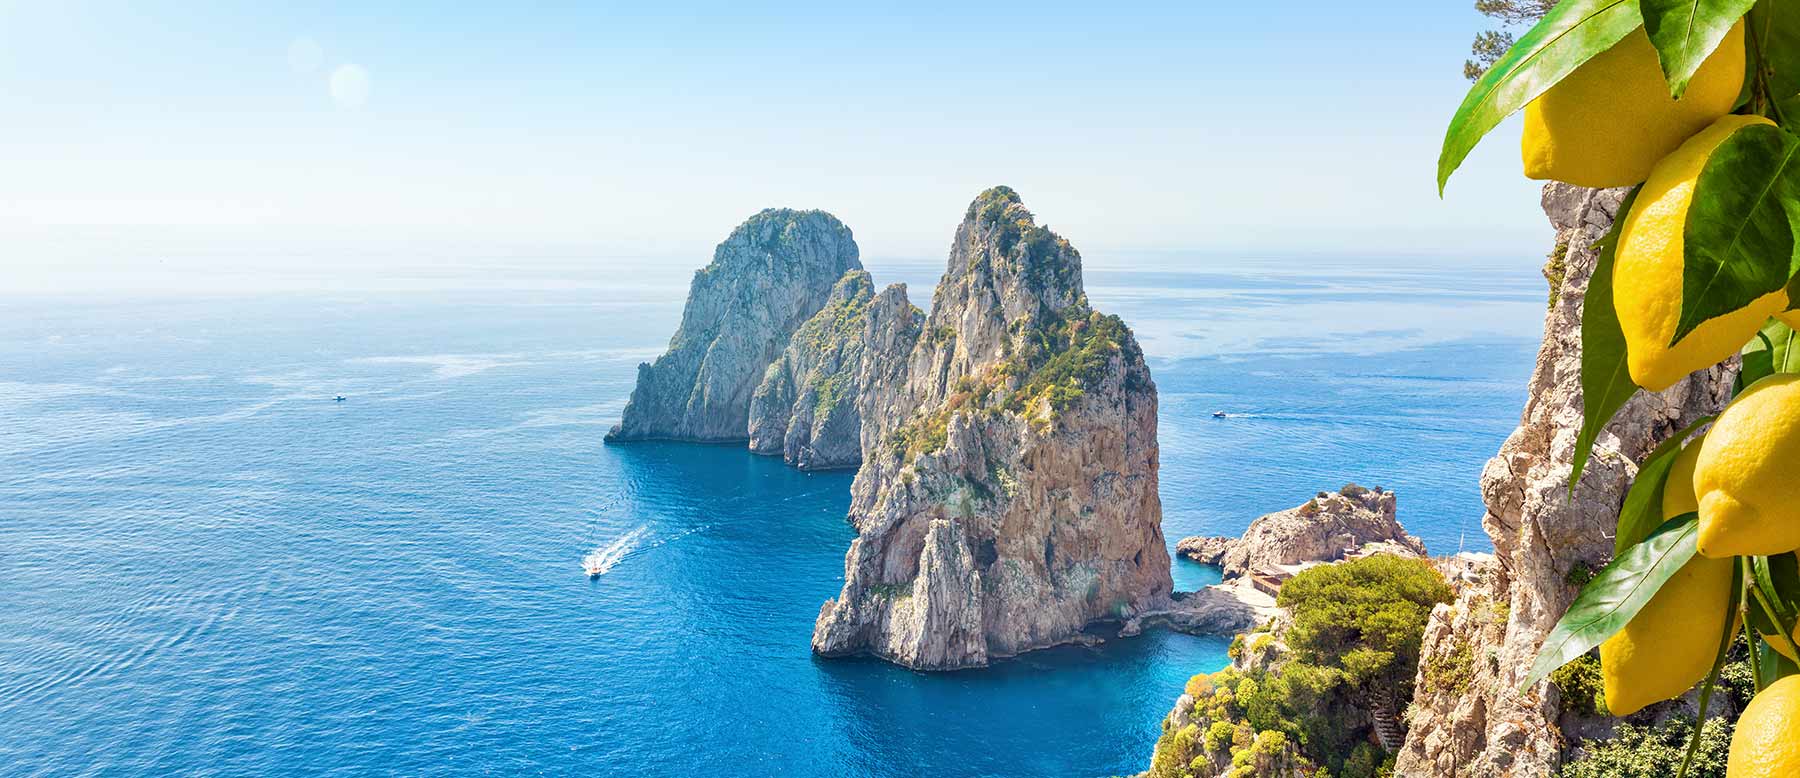 Capri island: all about the most elegant and fashionable luxury destinations